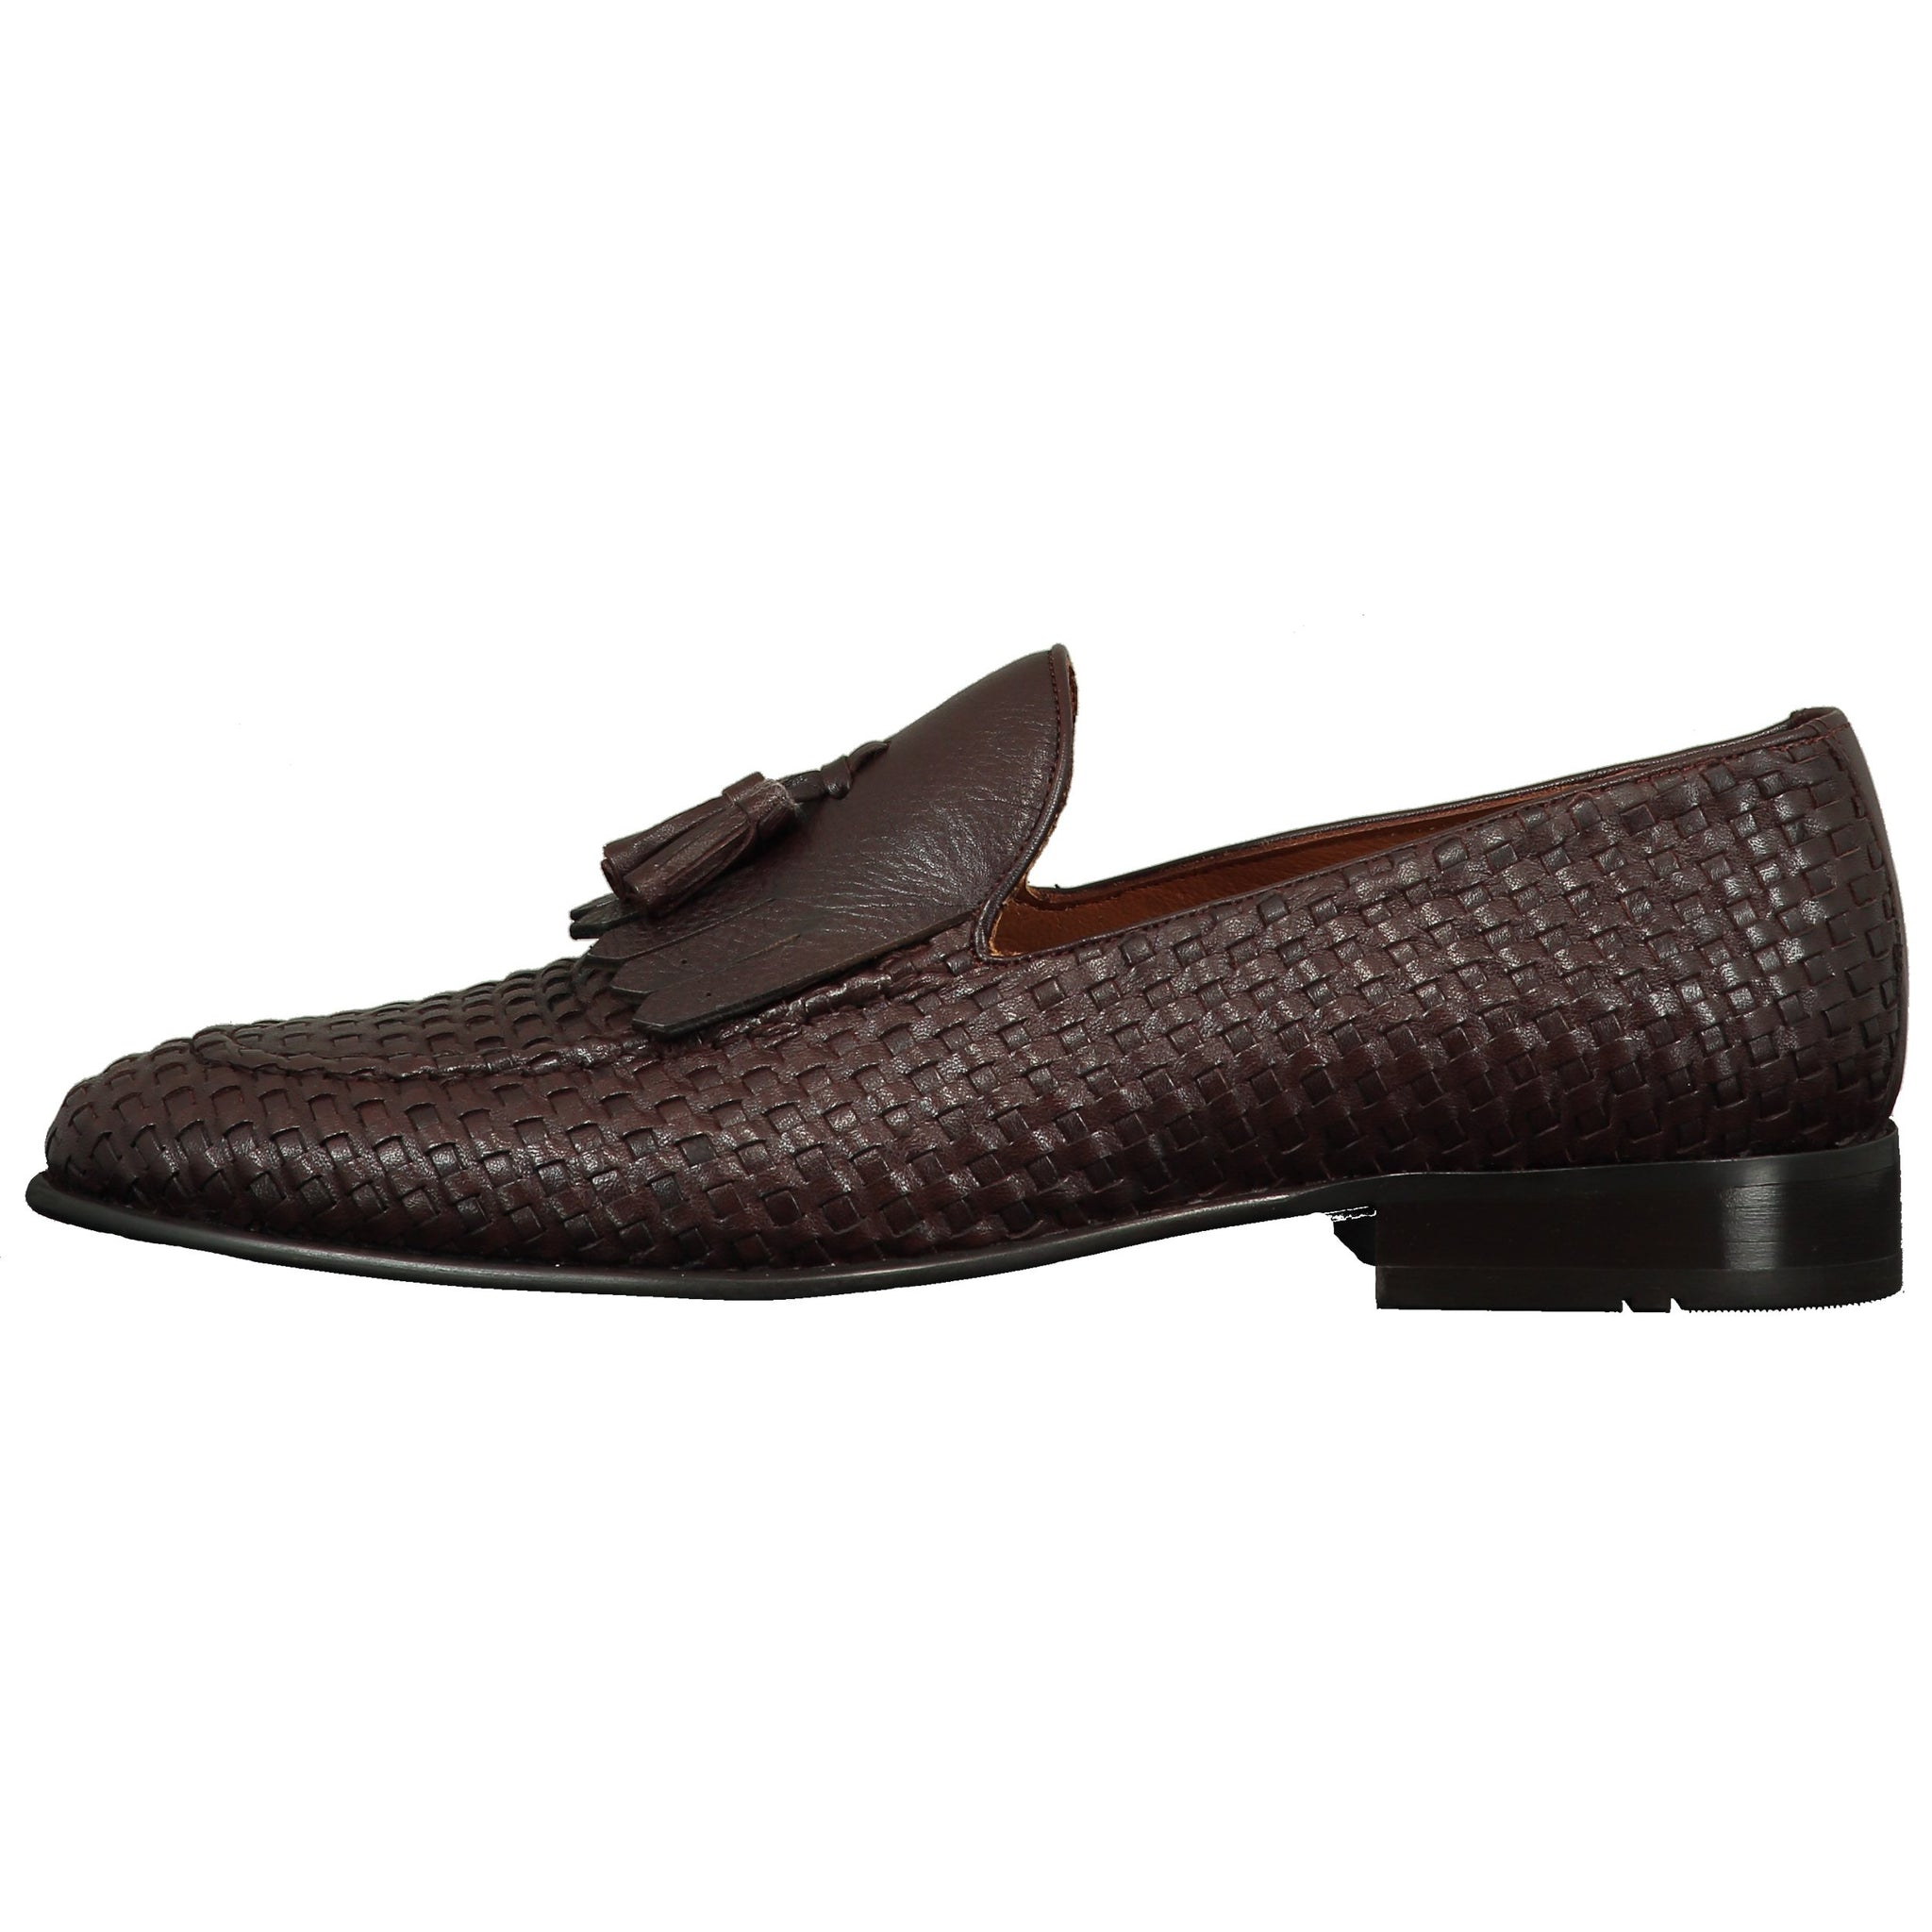 loafer rubber shoes